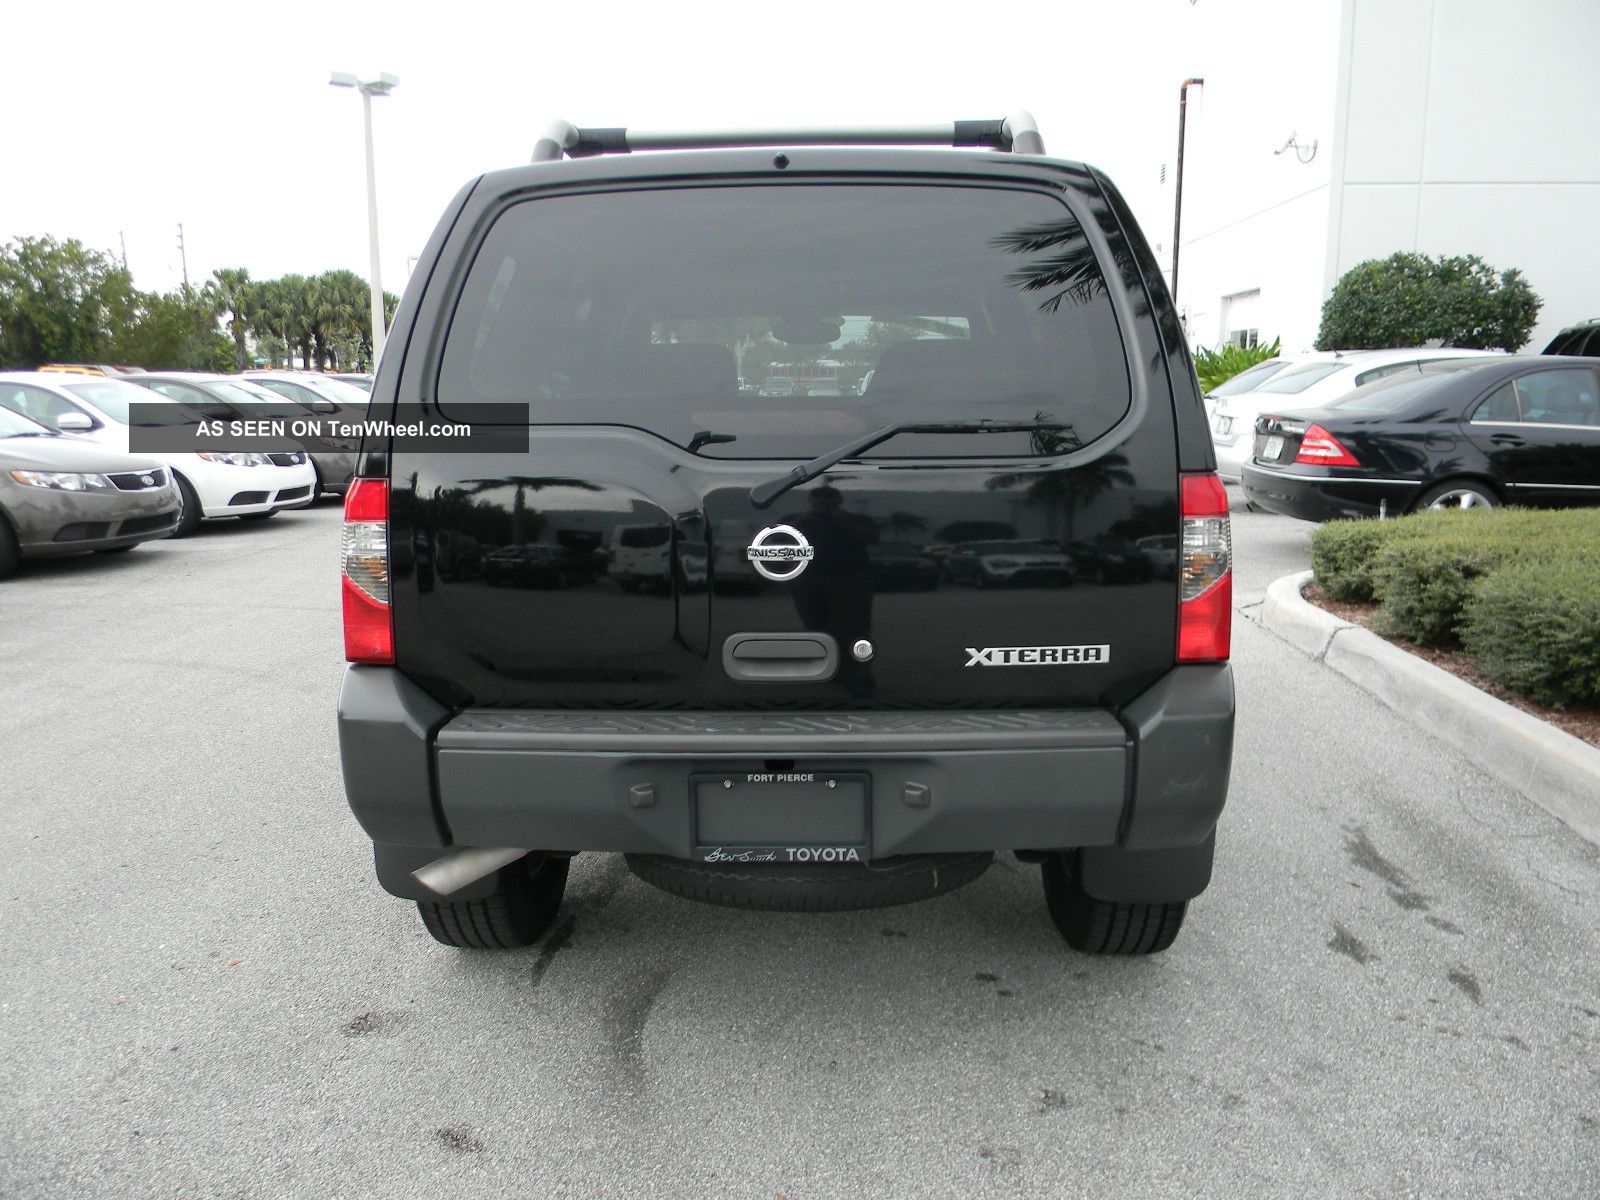 Looking for 2004 more nissan xterra sport utility vehicles #9